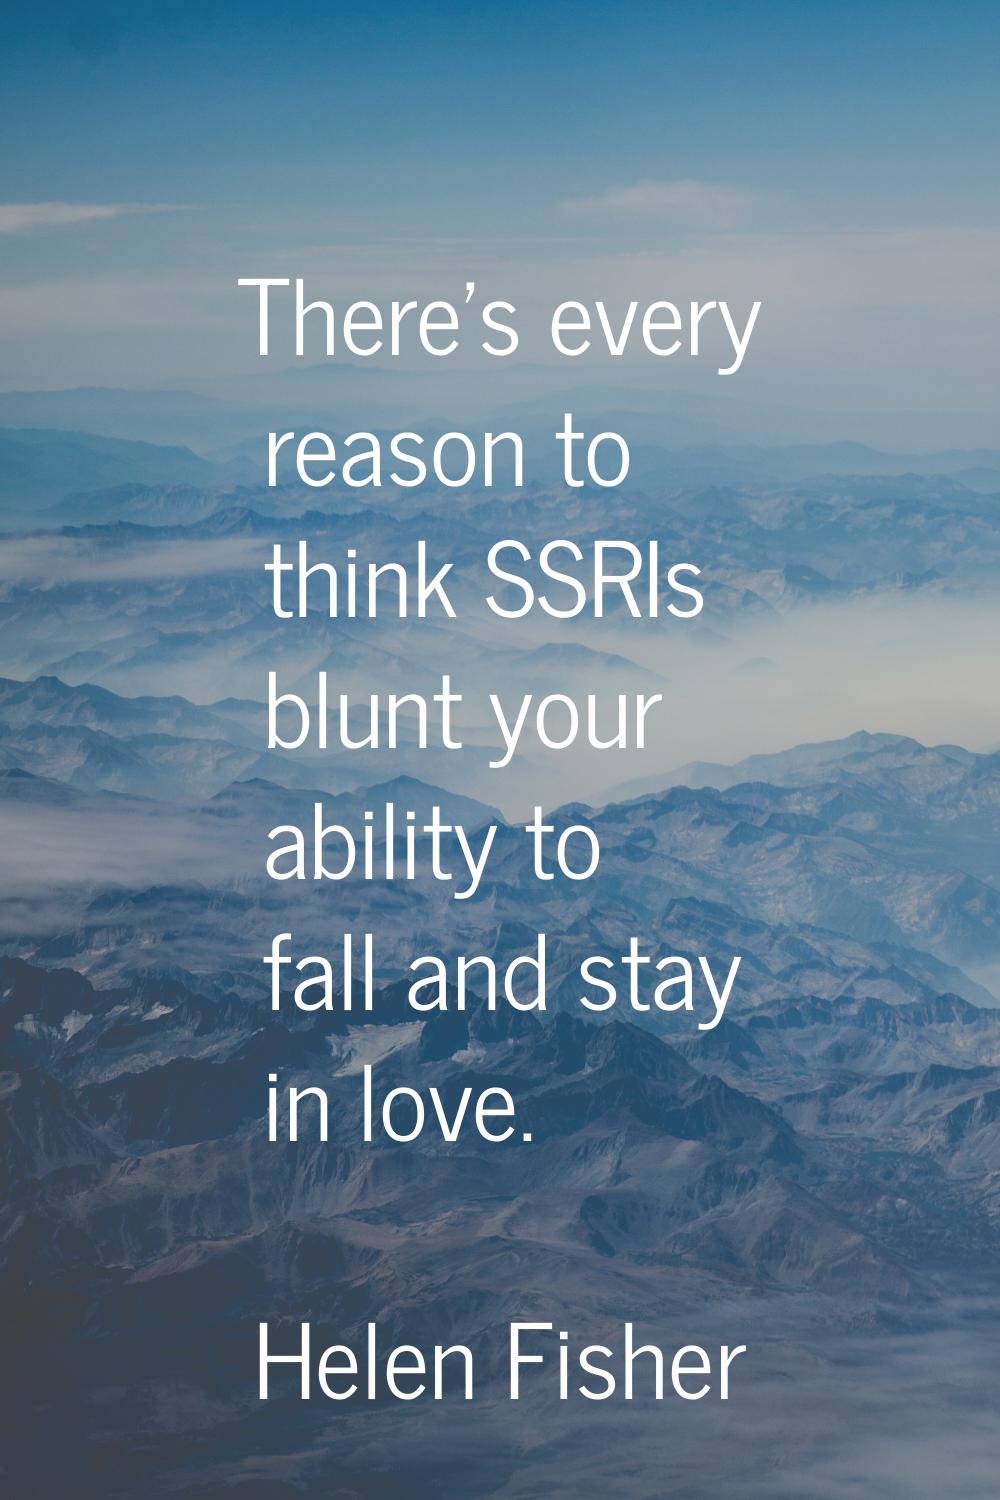 There's every reason to think SSRIs blunt your ability to fall and stay in love.